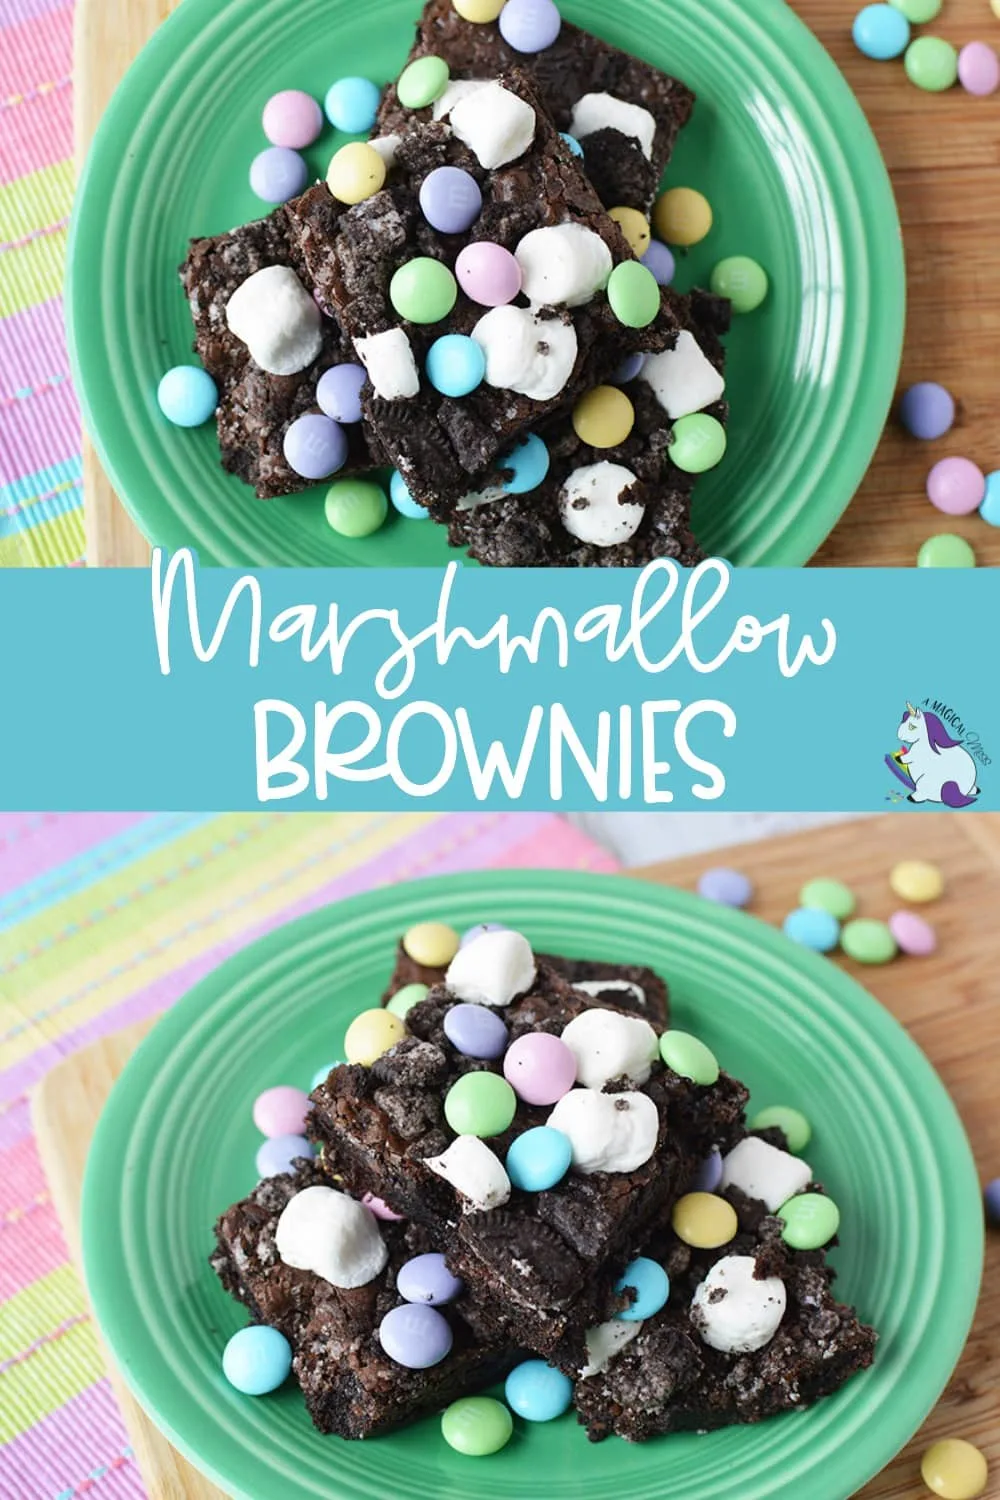 Marshmallow brownies on a plate.